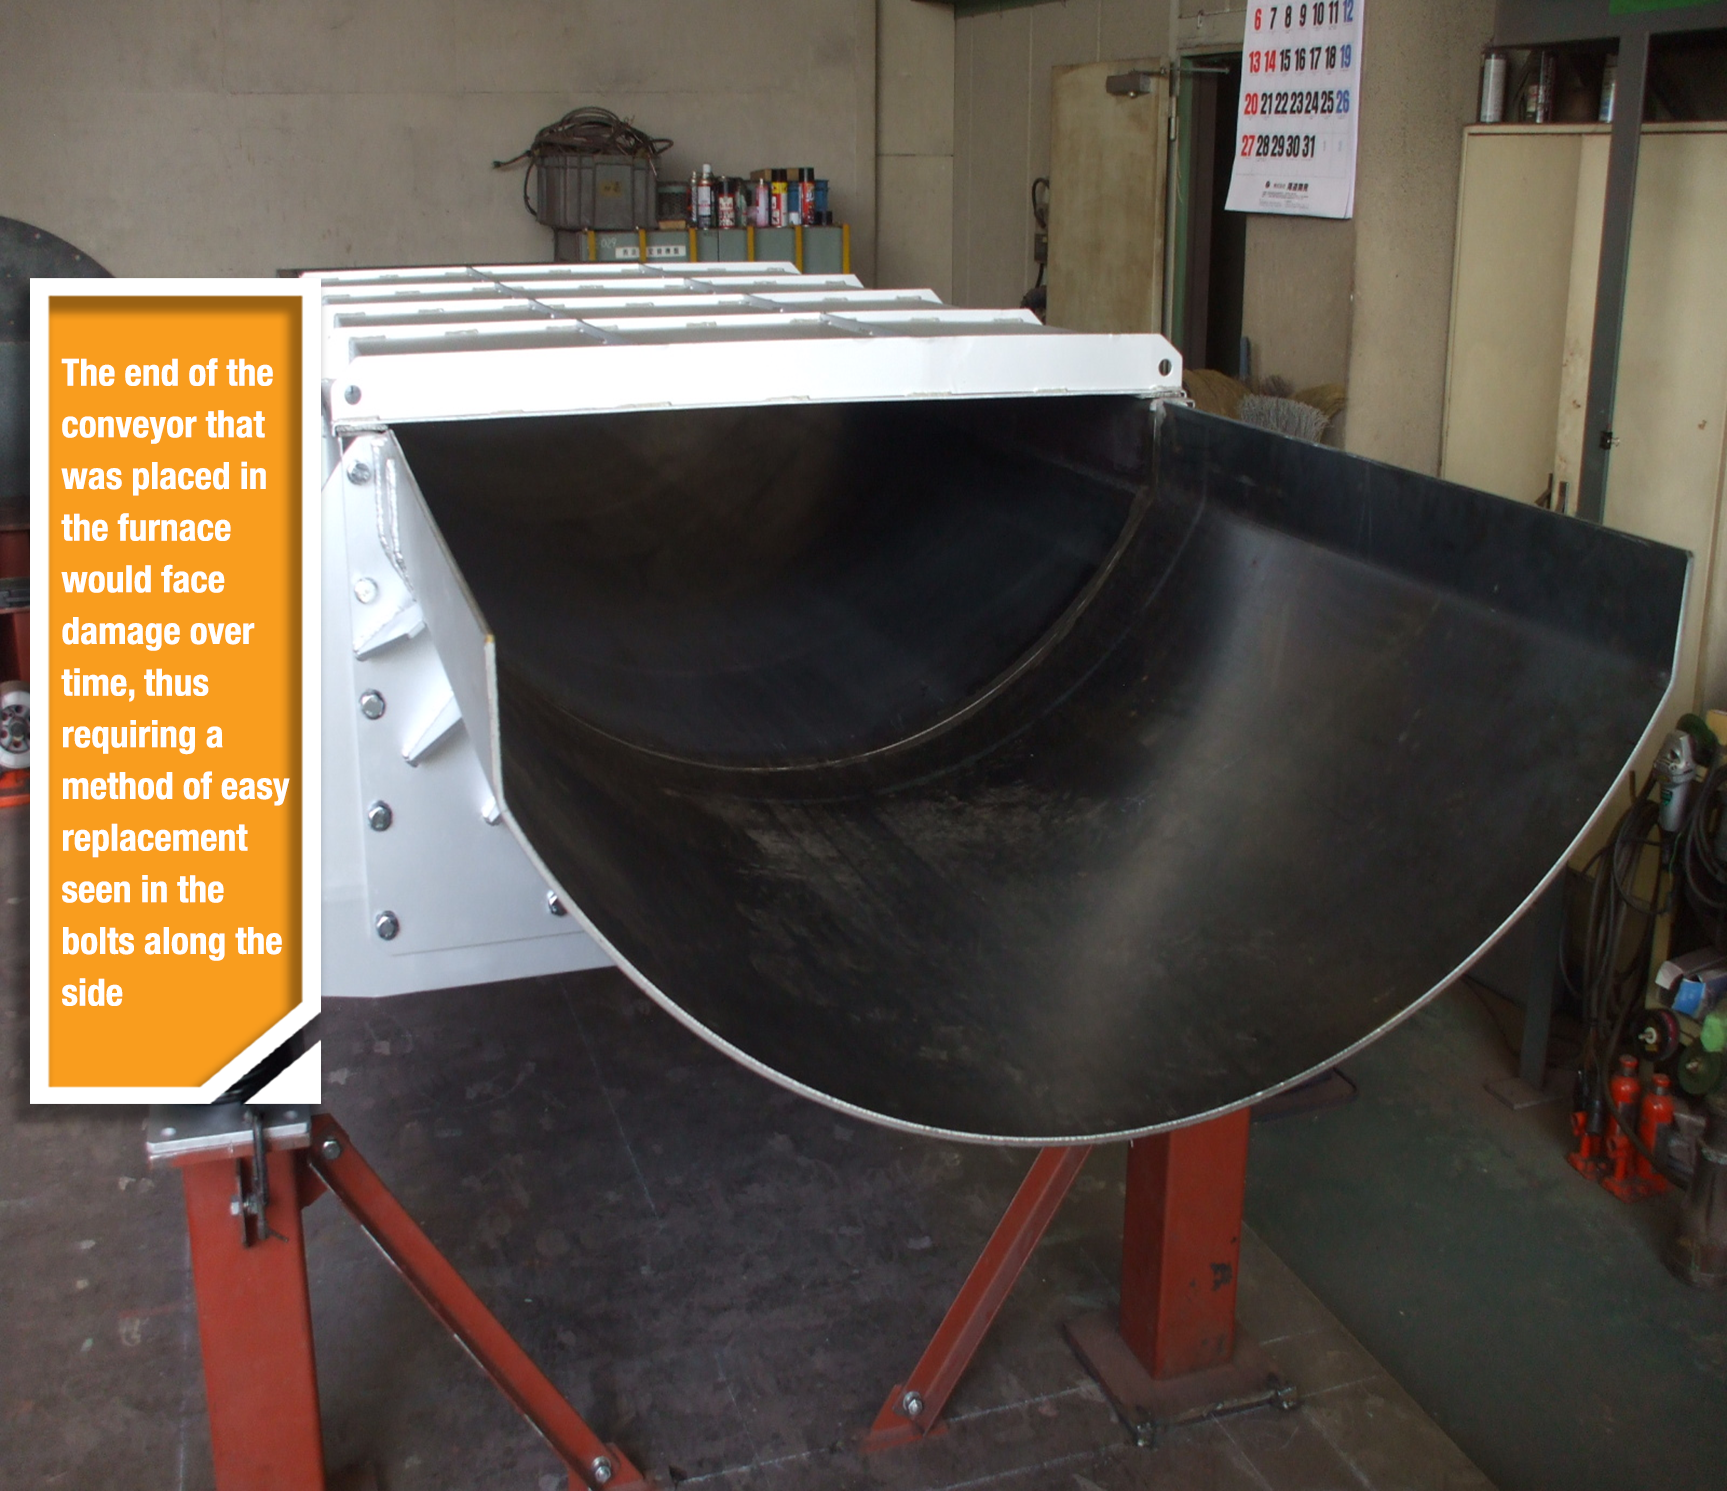 Reliable Vibro Conveyor made for conveying high temperature material, used in mining, casting industries.  Made with the highest level of engineering.